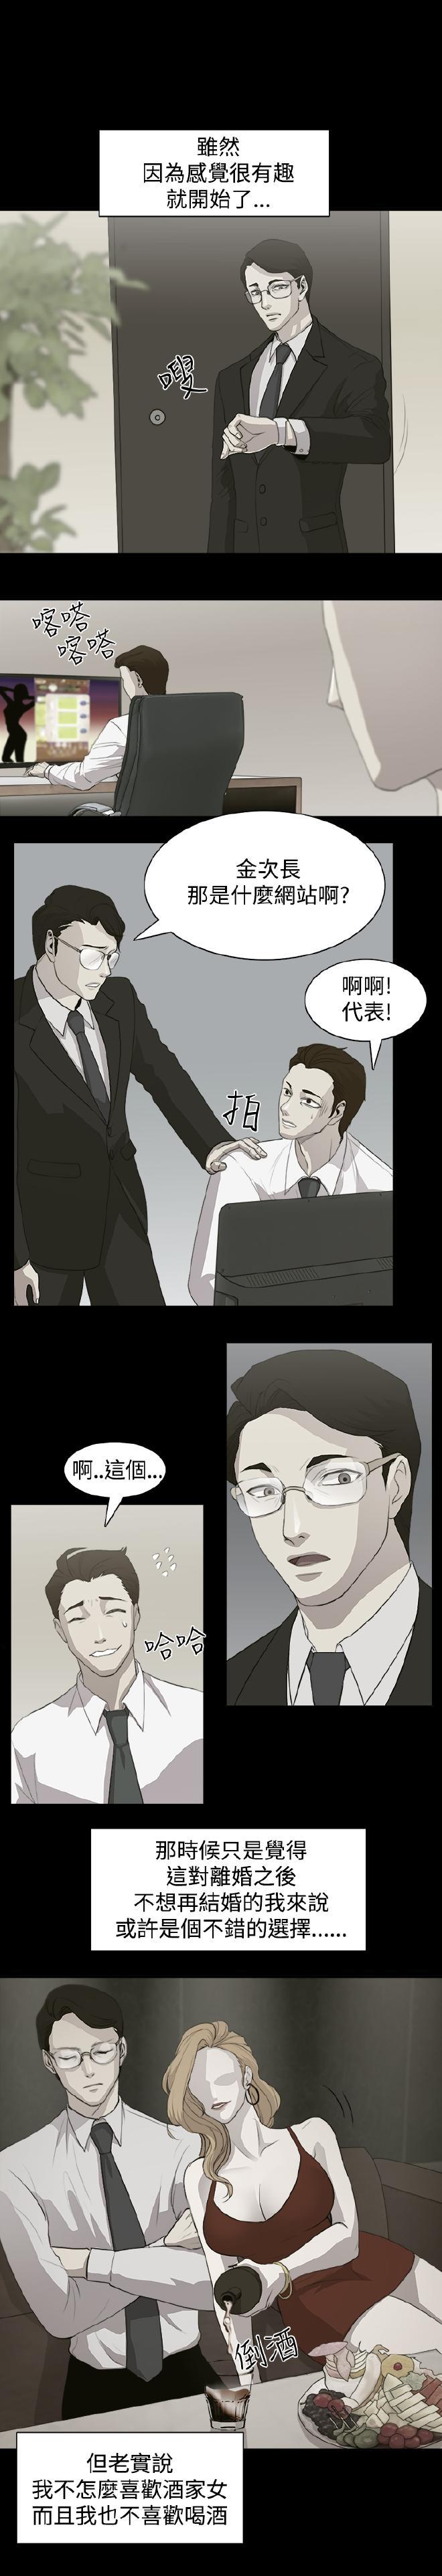 Pissing 赞助者 Rimjob - Page 11